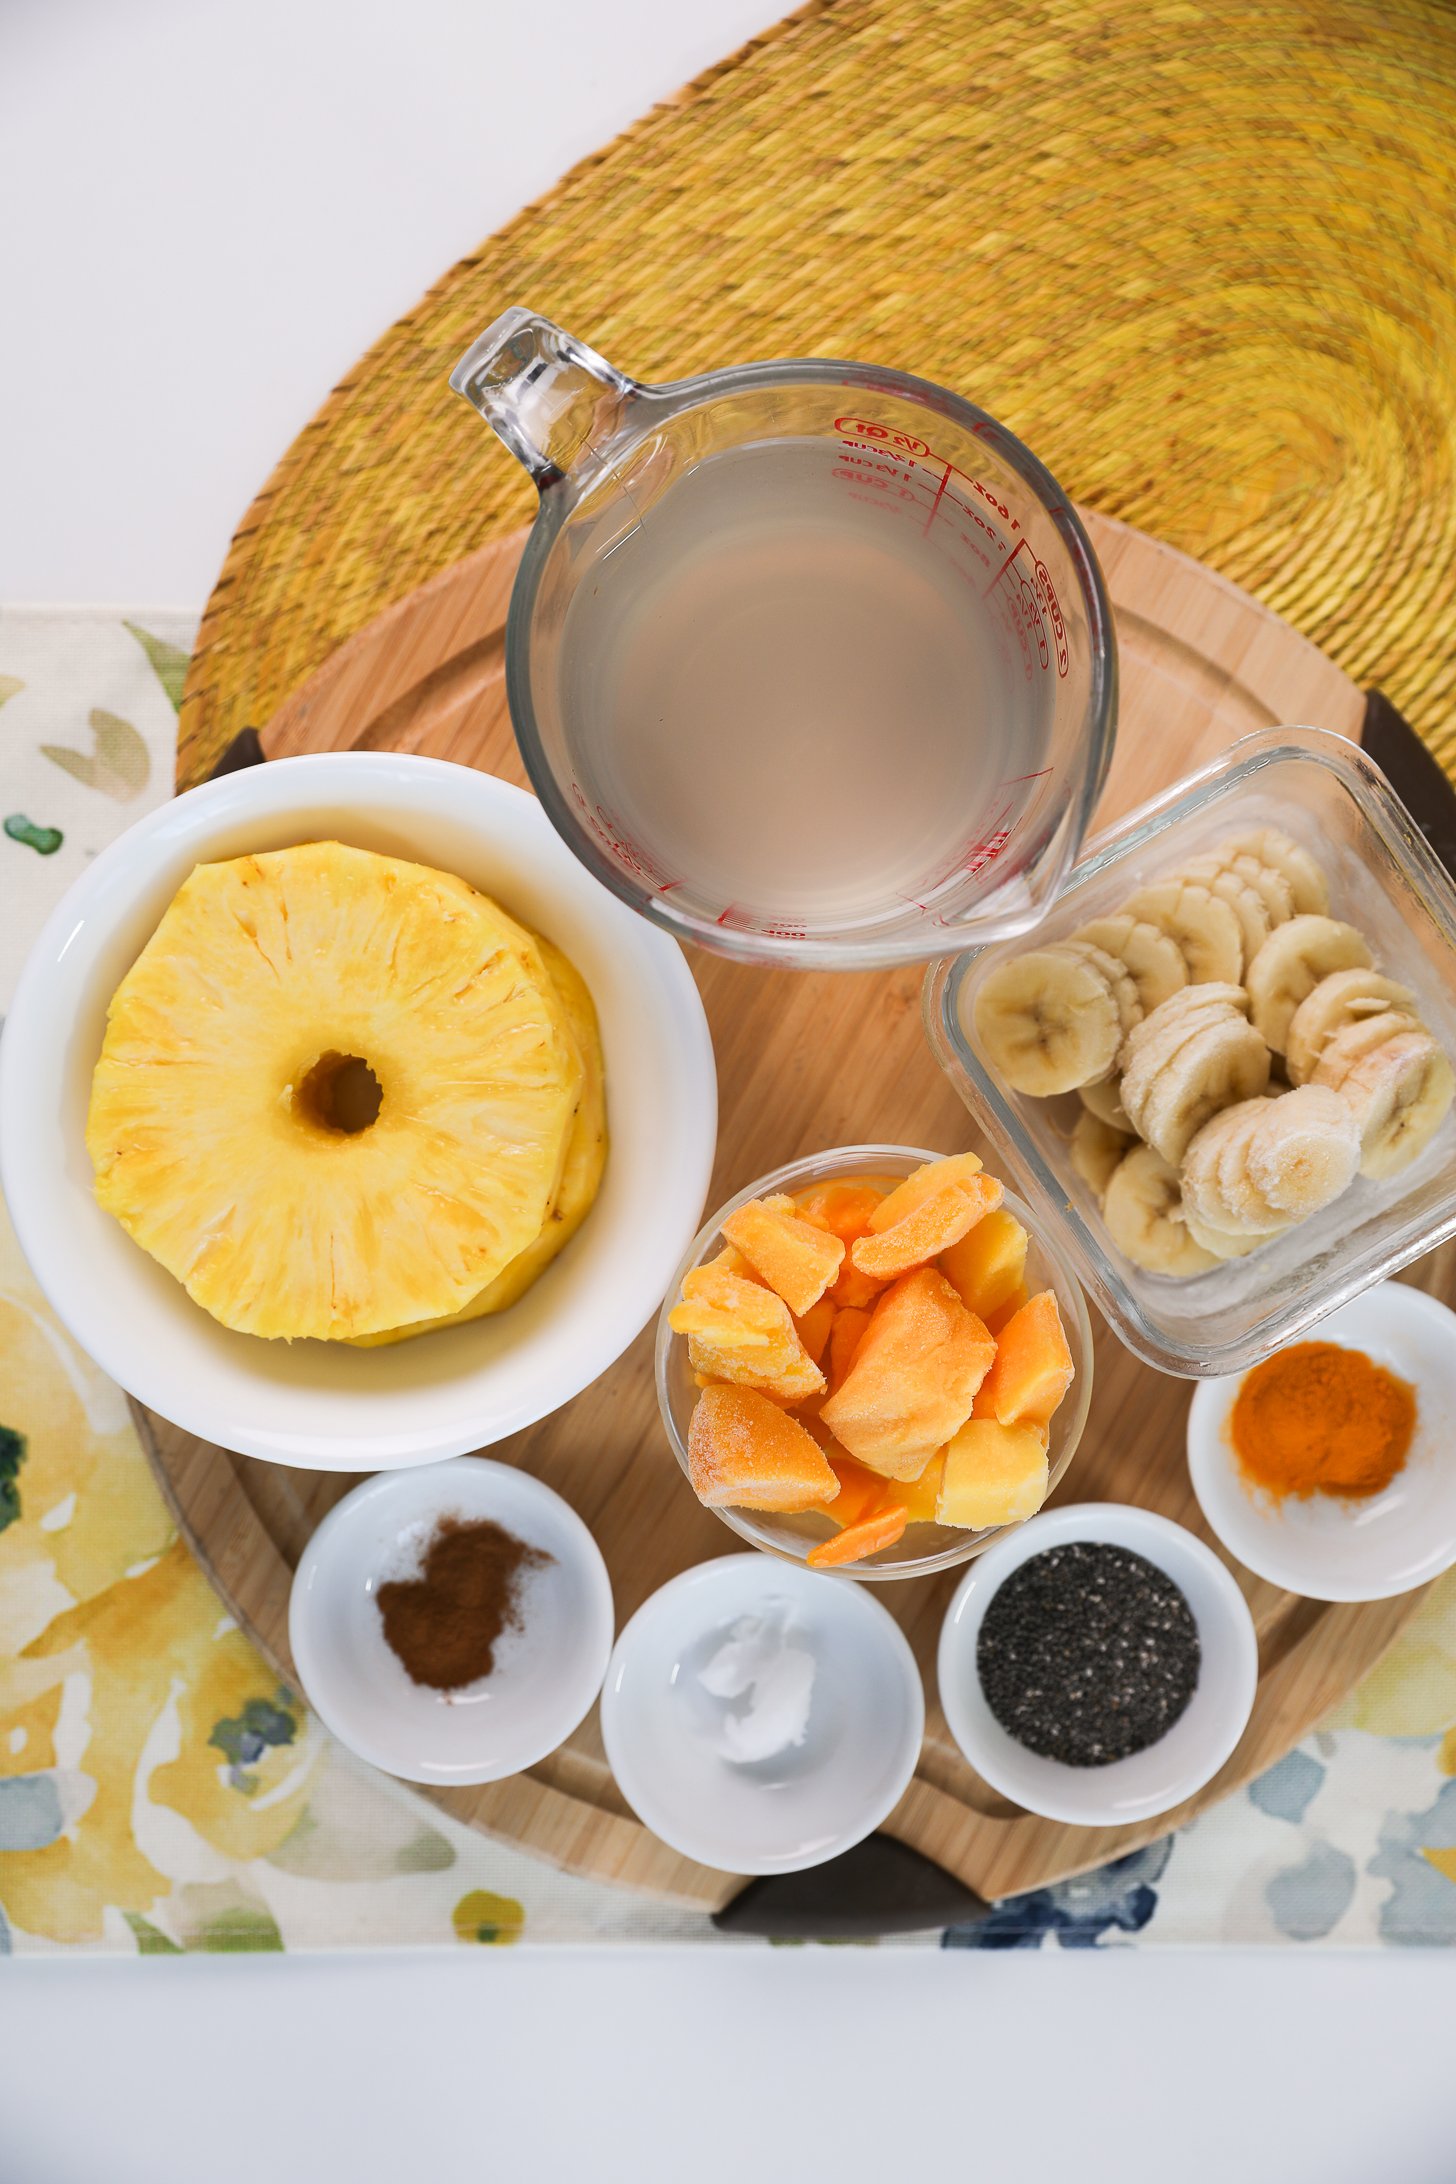 A selection of food ingredients including pineapple rings, mango chunks, banana slices, chia seeds, spices and coconut water.